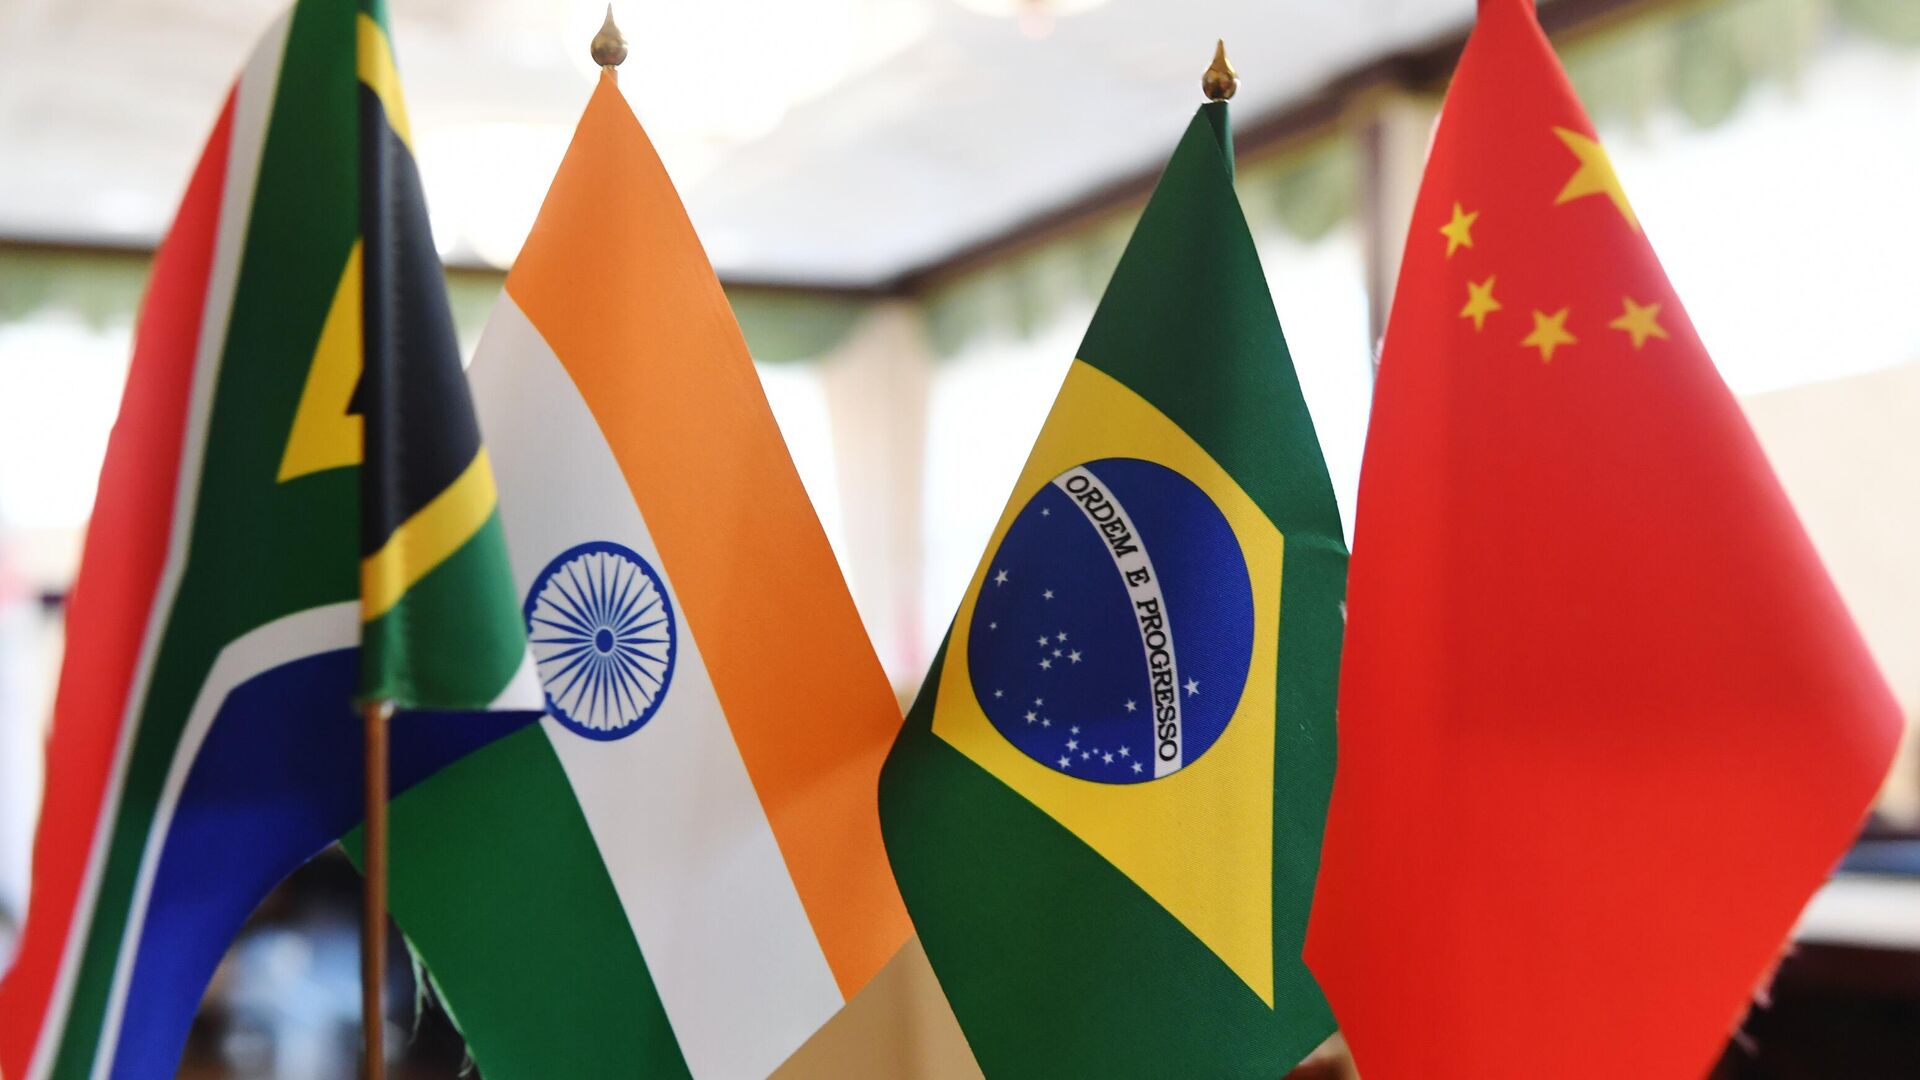 Flags of the BRICS countries: South Africa, India, Brazil and China. - Sputnik Afrique, 1920, 25.05.2023